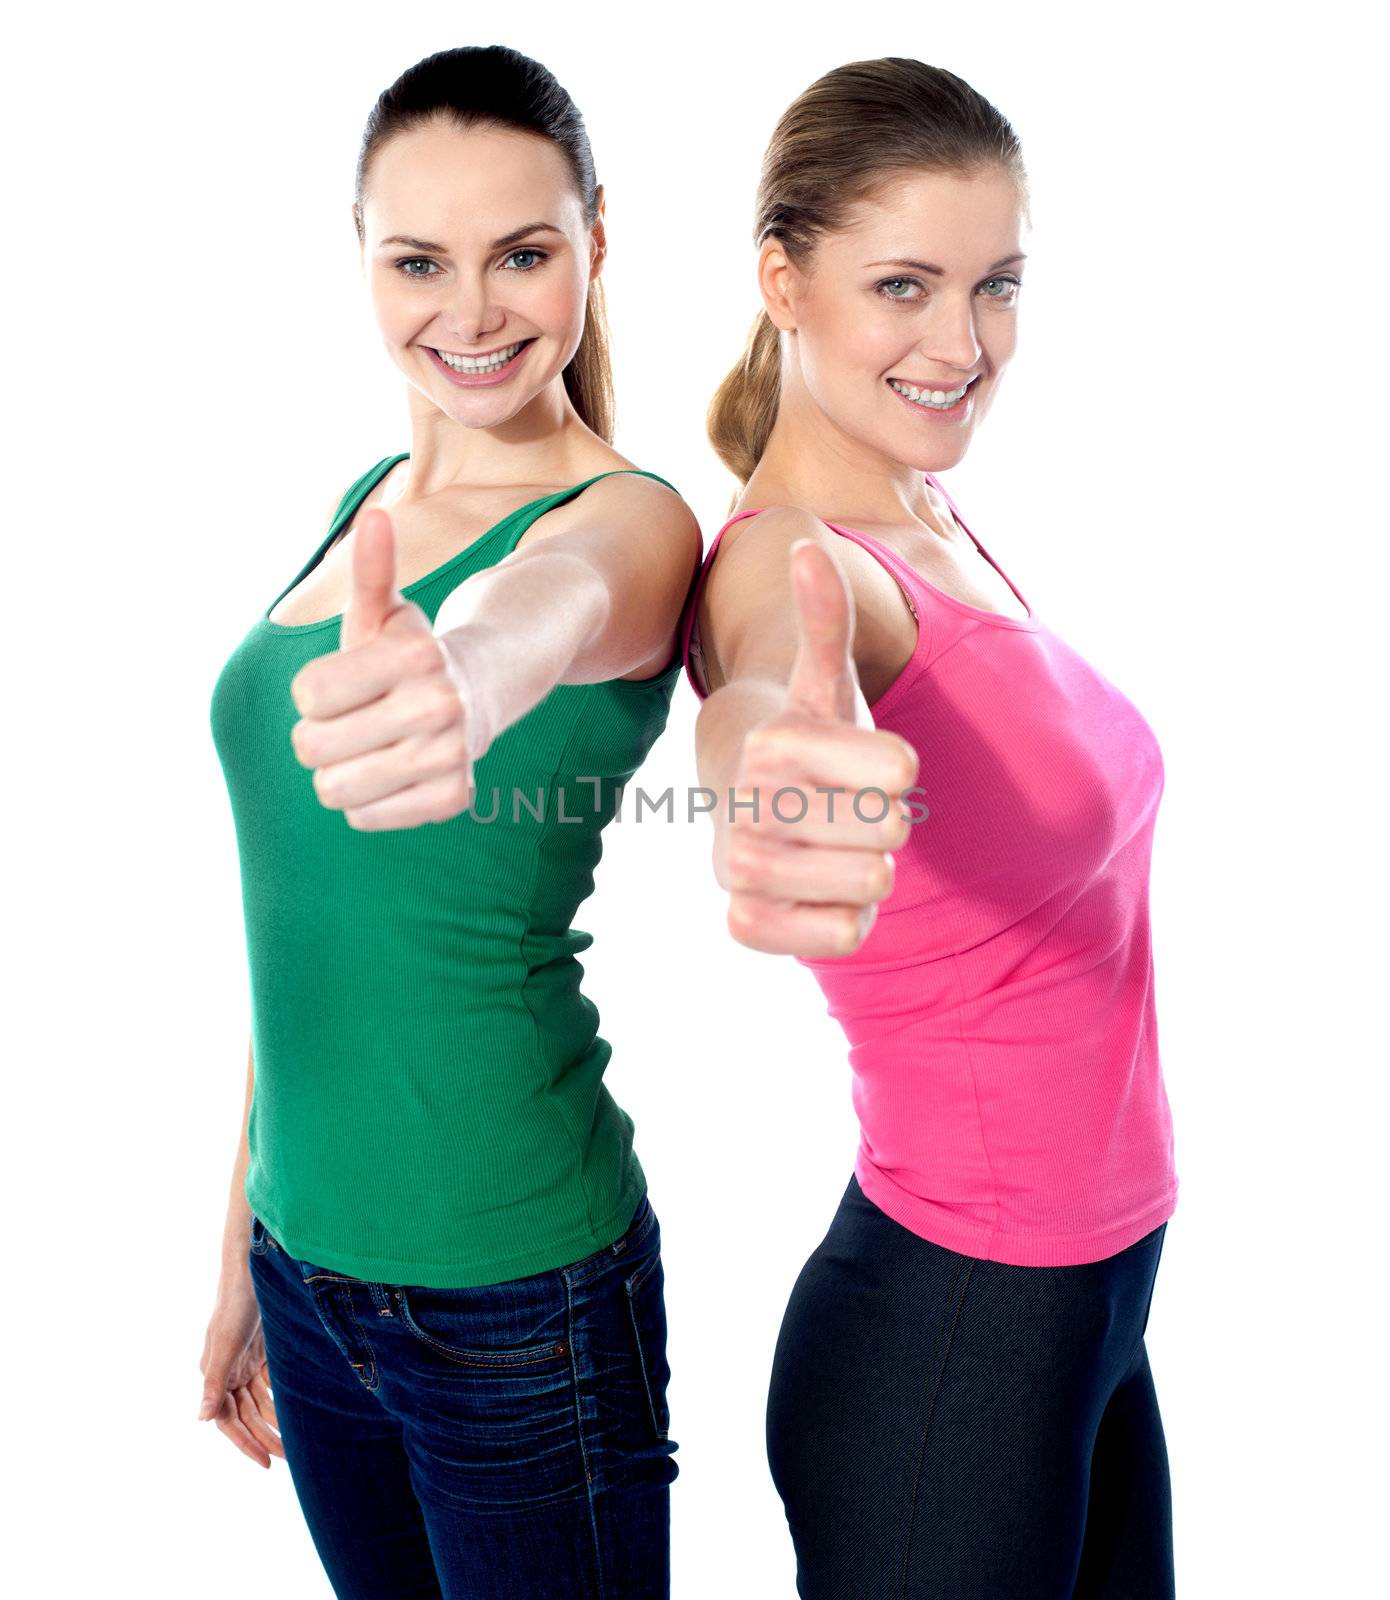 Smiling pretty girls gesturing thumbs-up isolated on white background